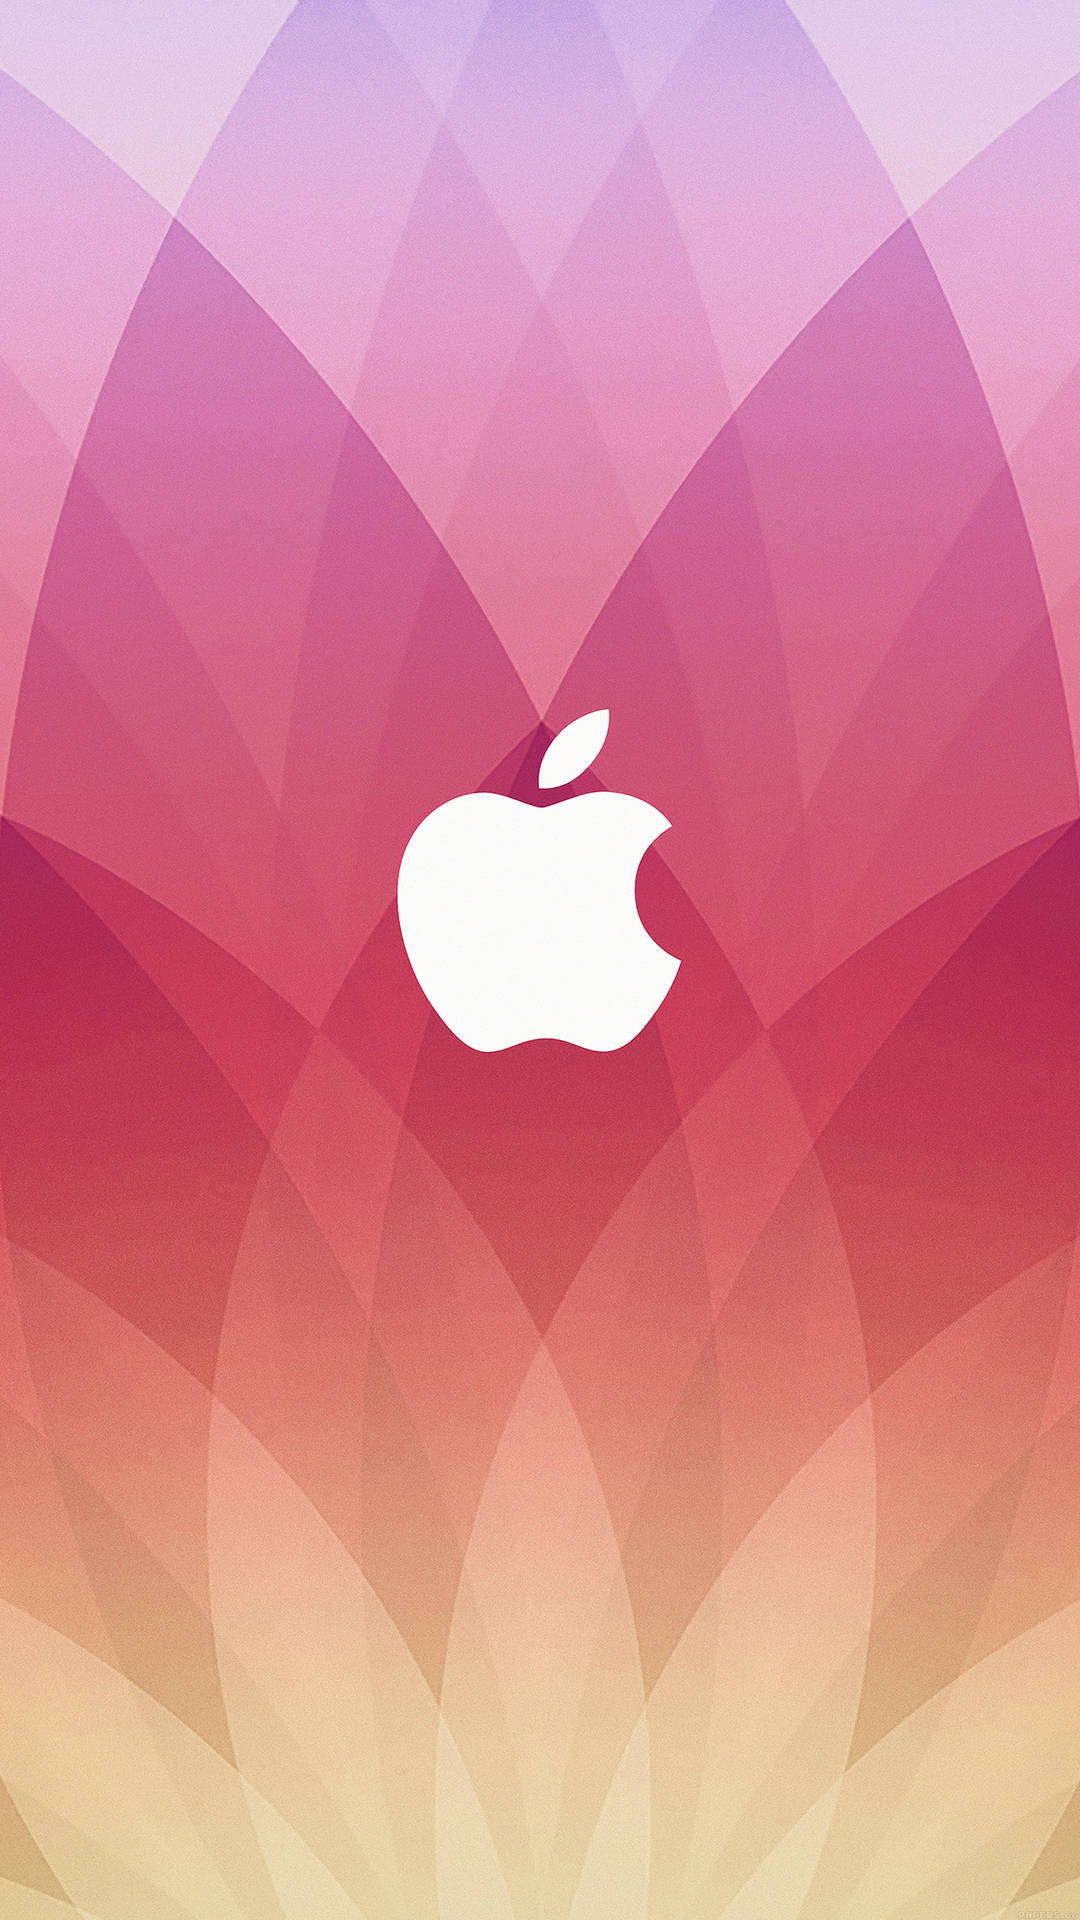 Red And Yellow Gradient Apple Logo Smartphone Background Wallpaper